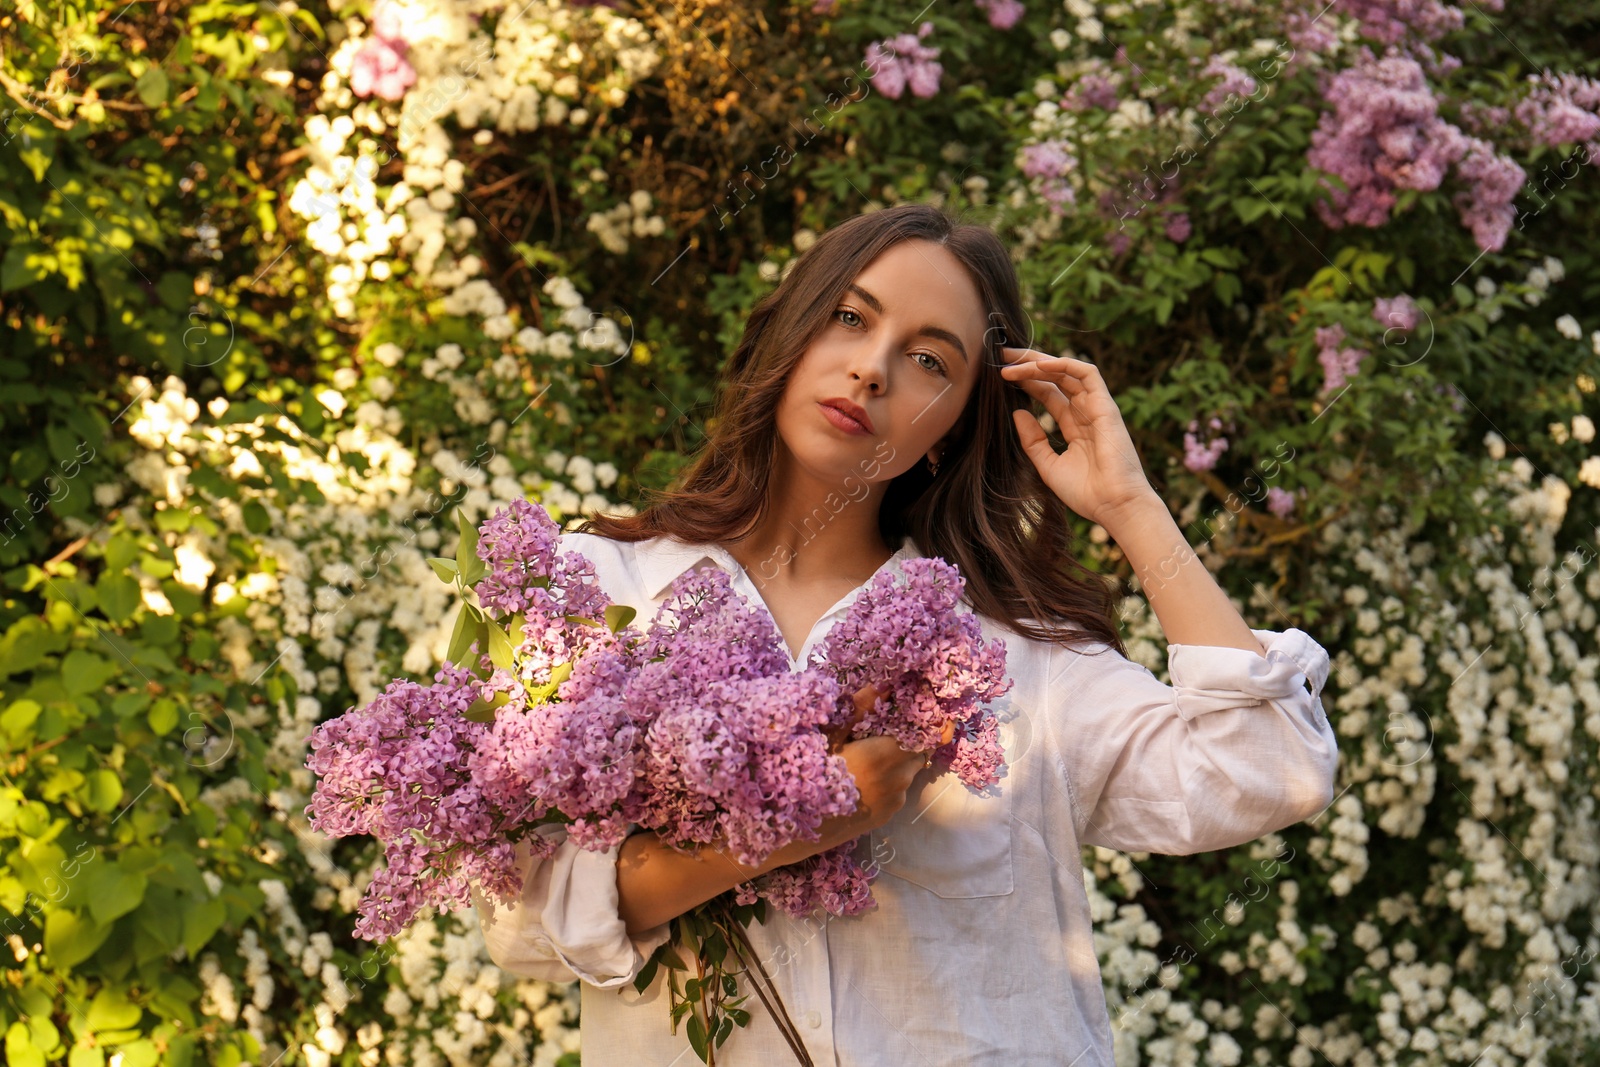 Photo of Attractive young woman with lilac flowers outdoors